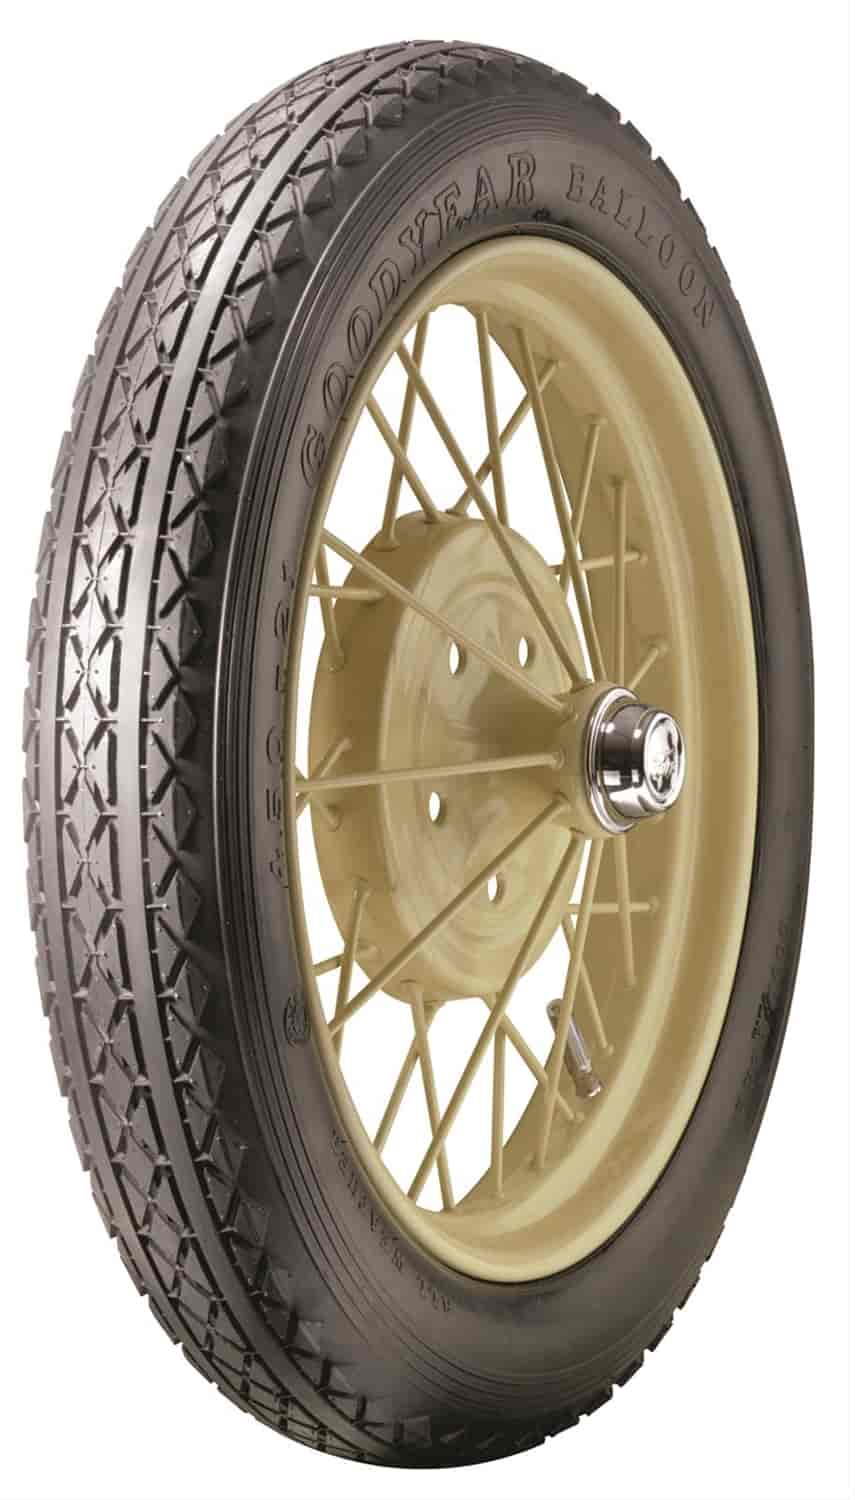 Goodyear Collector Series All-Weather Balloon Tire